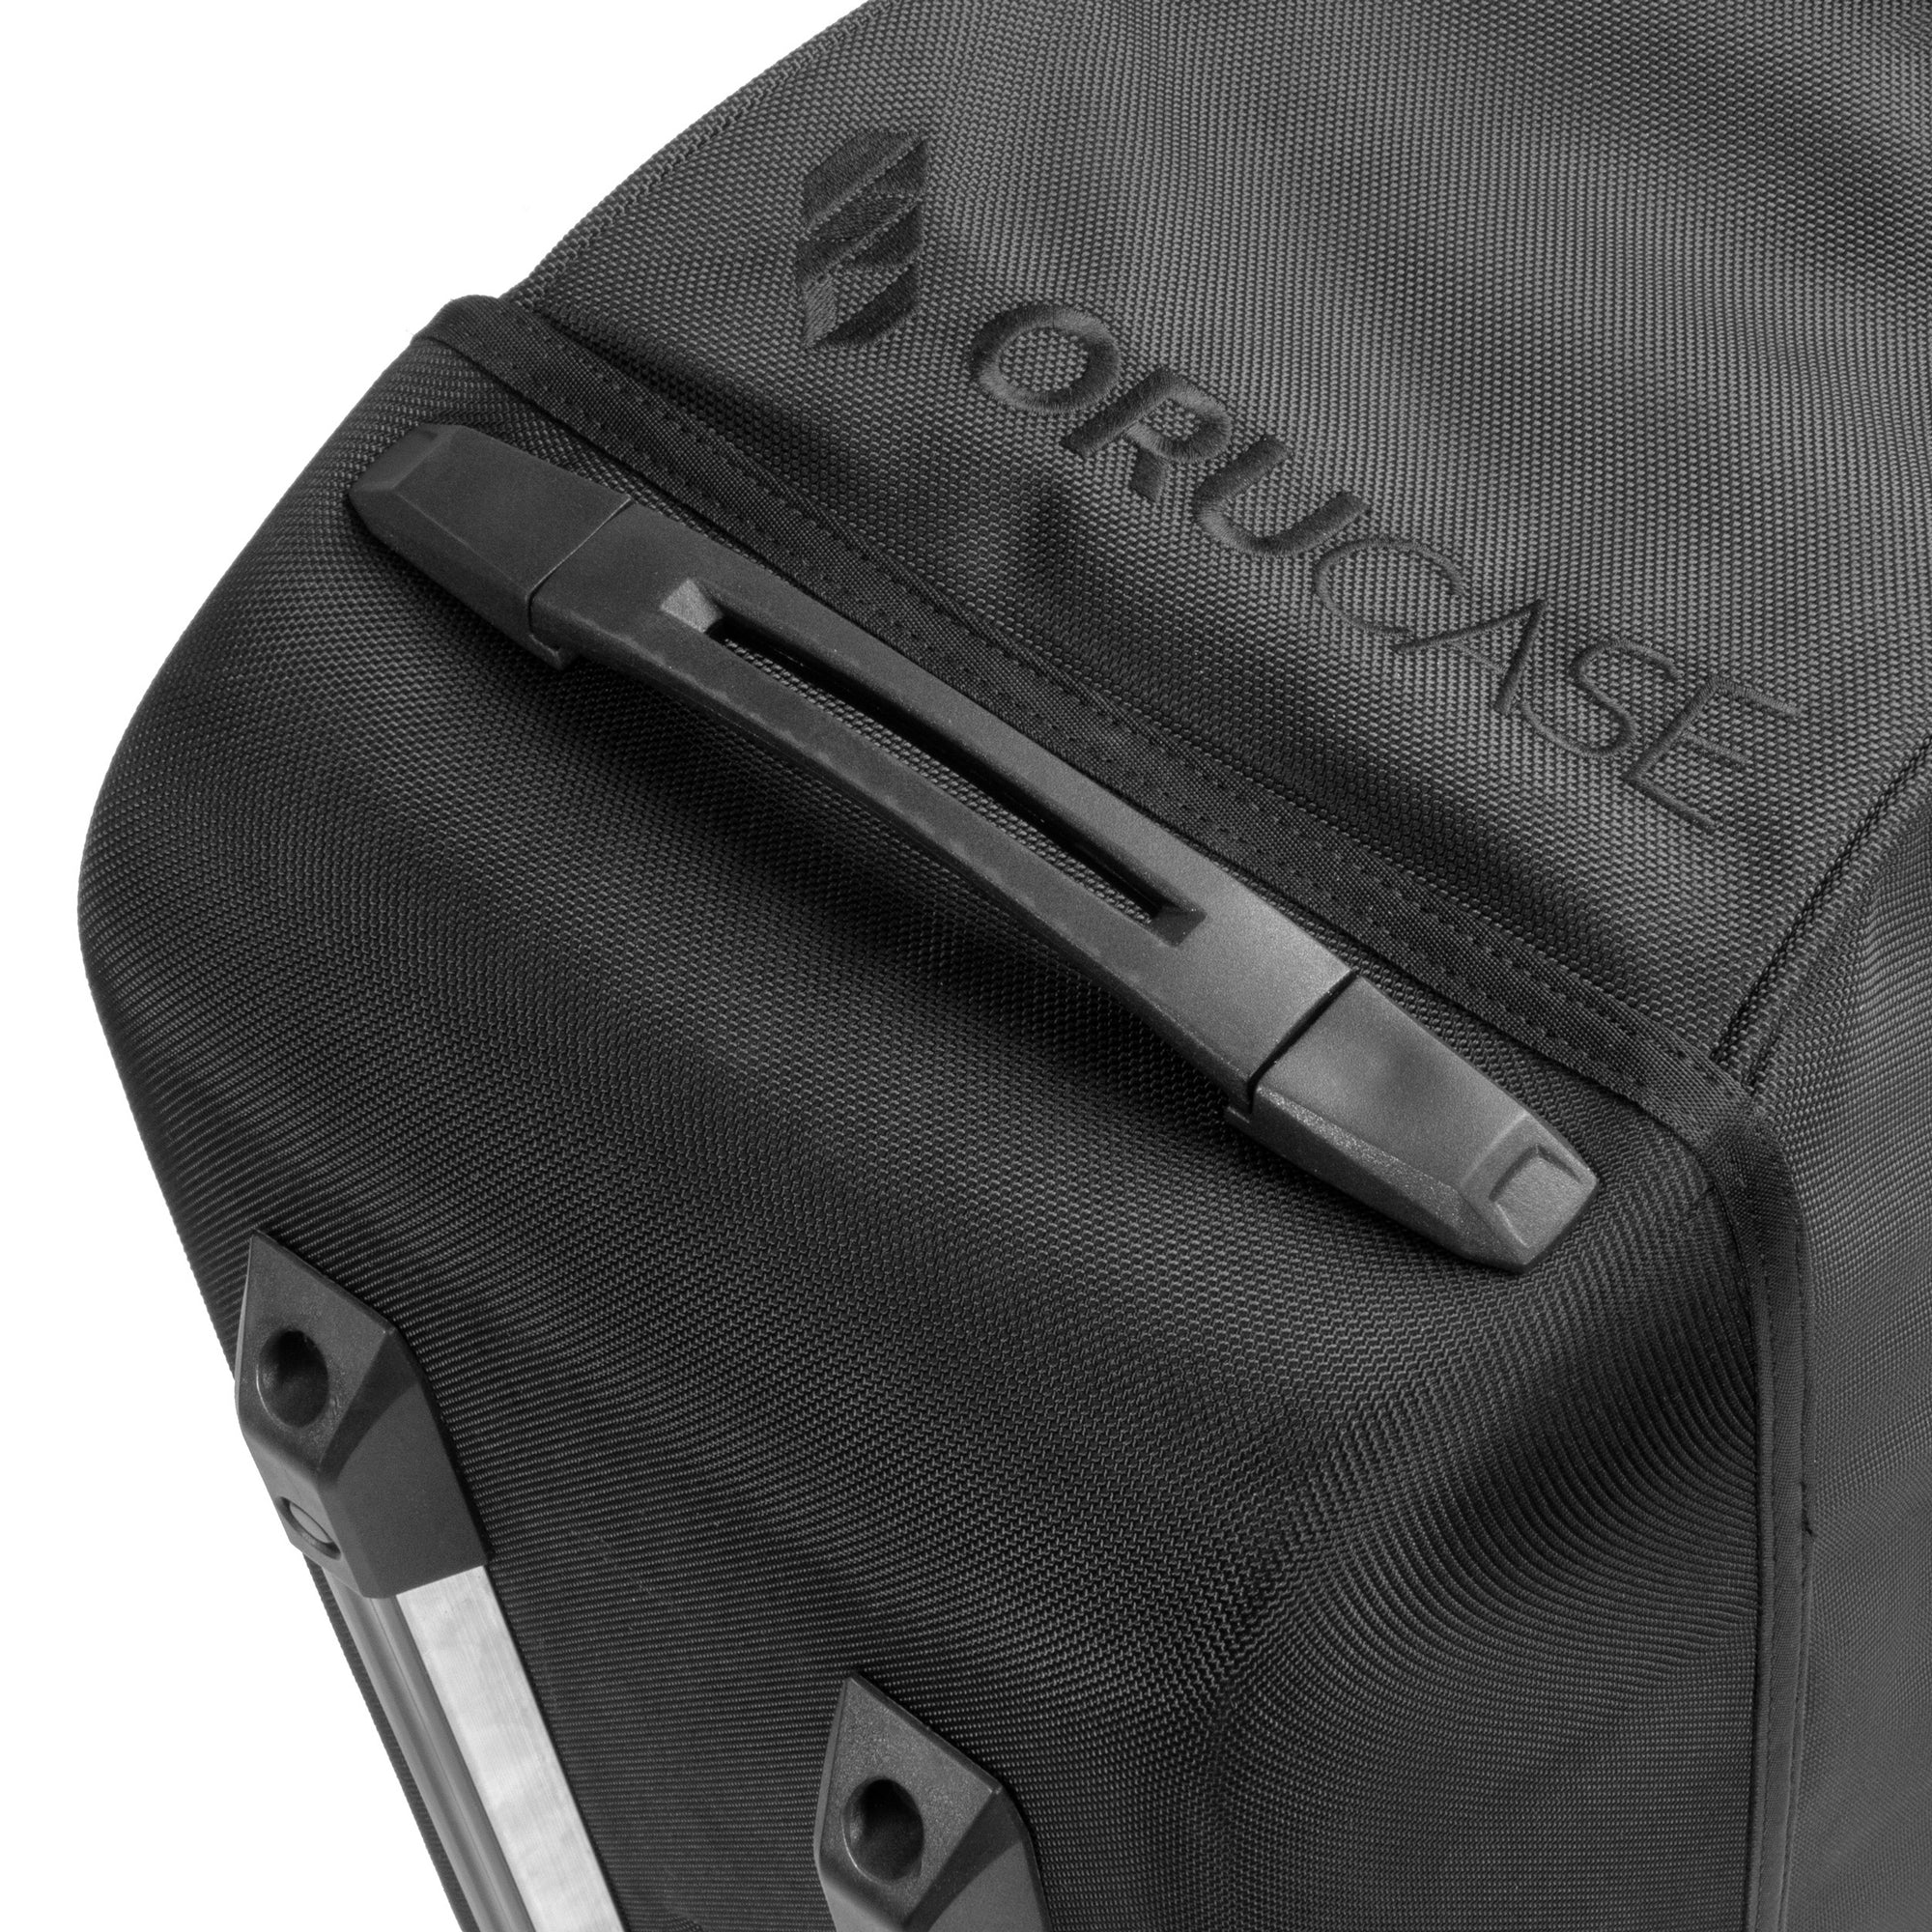 Orucase B2 Bike travel case - close up of handle for rolling